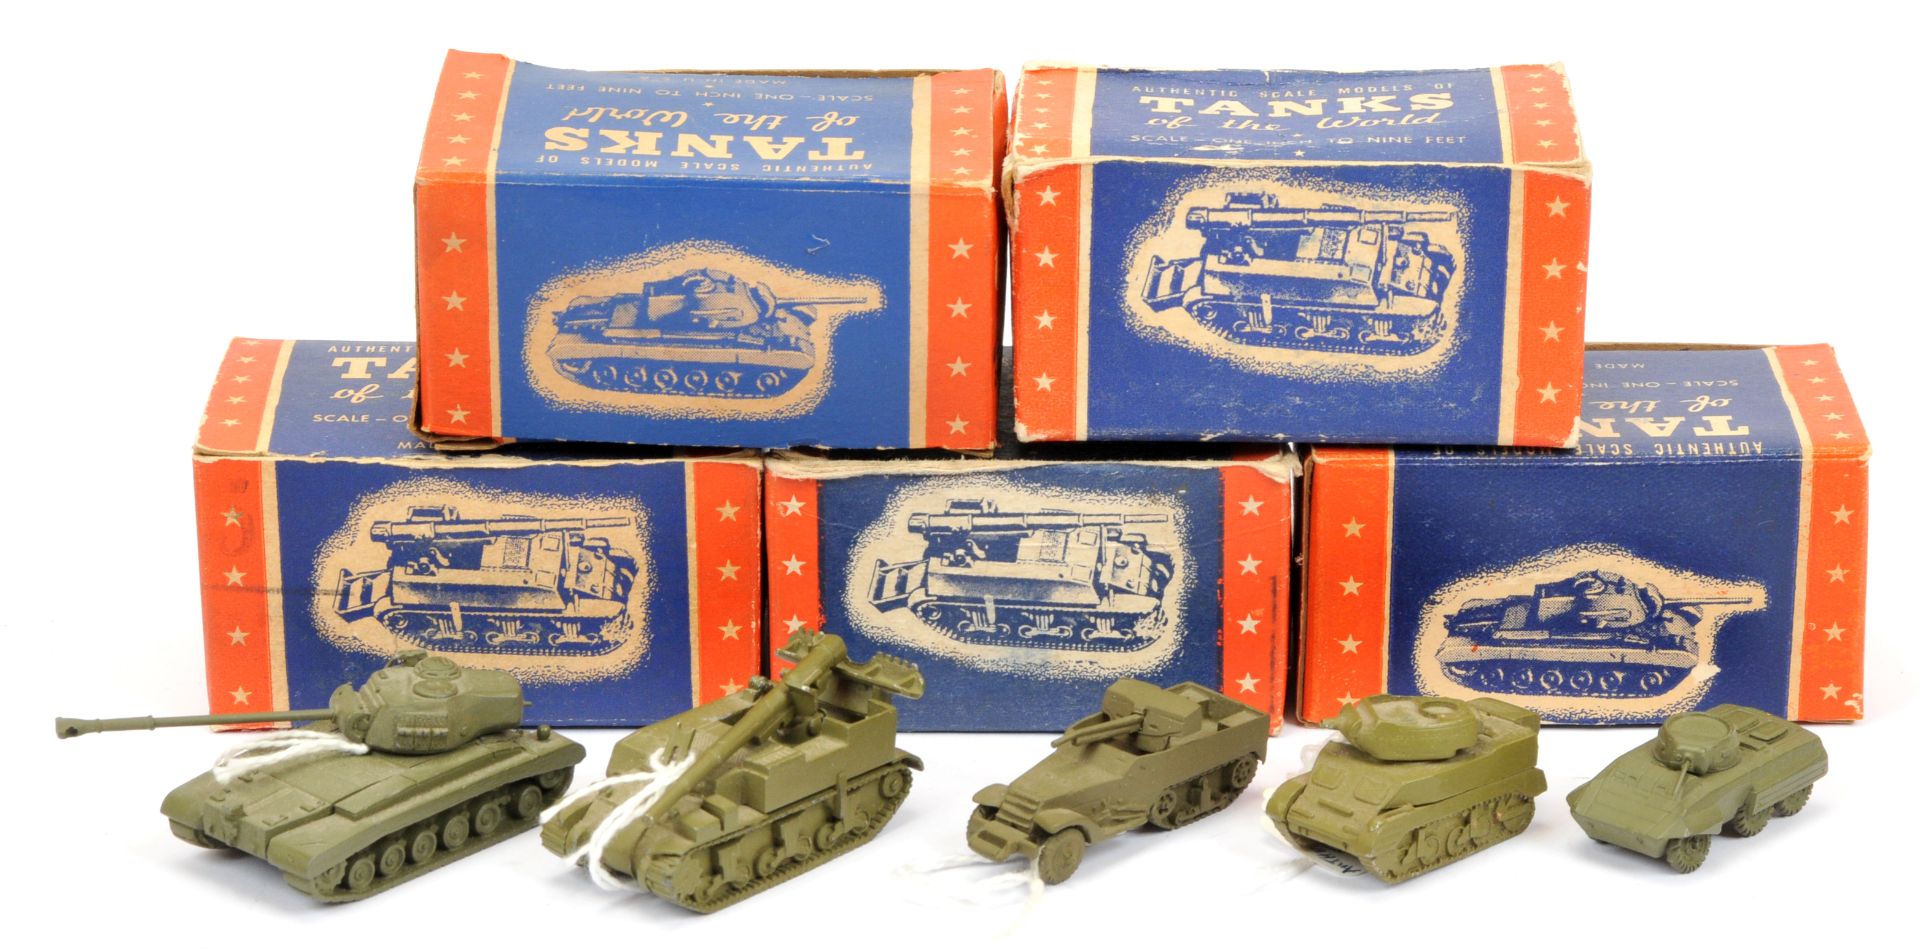 Authenticast diecast Military vehicles. group of 5 - (1) US Self-propelled gun (2) 7mm howitzer